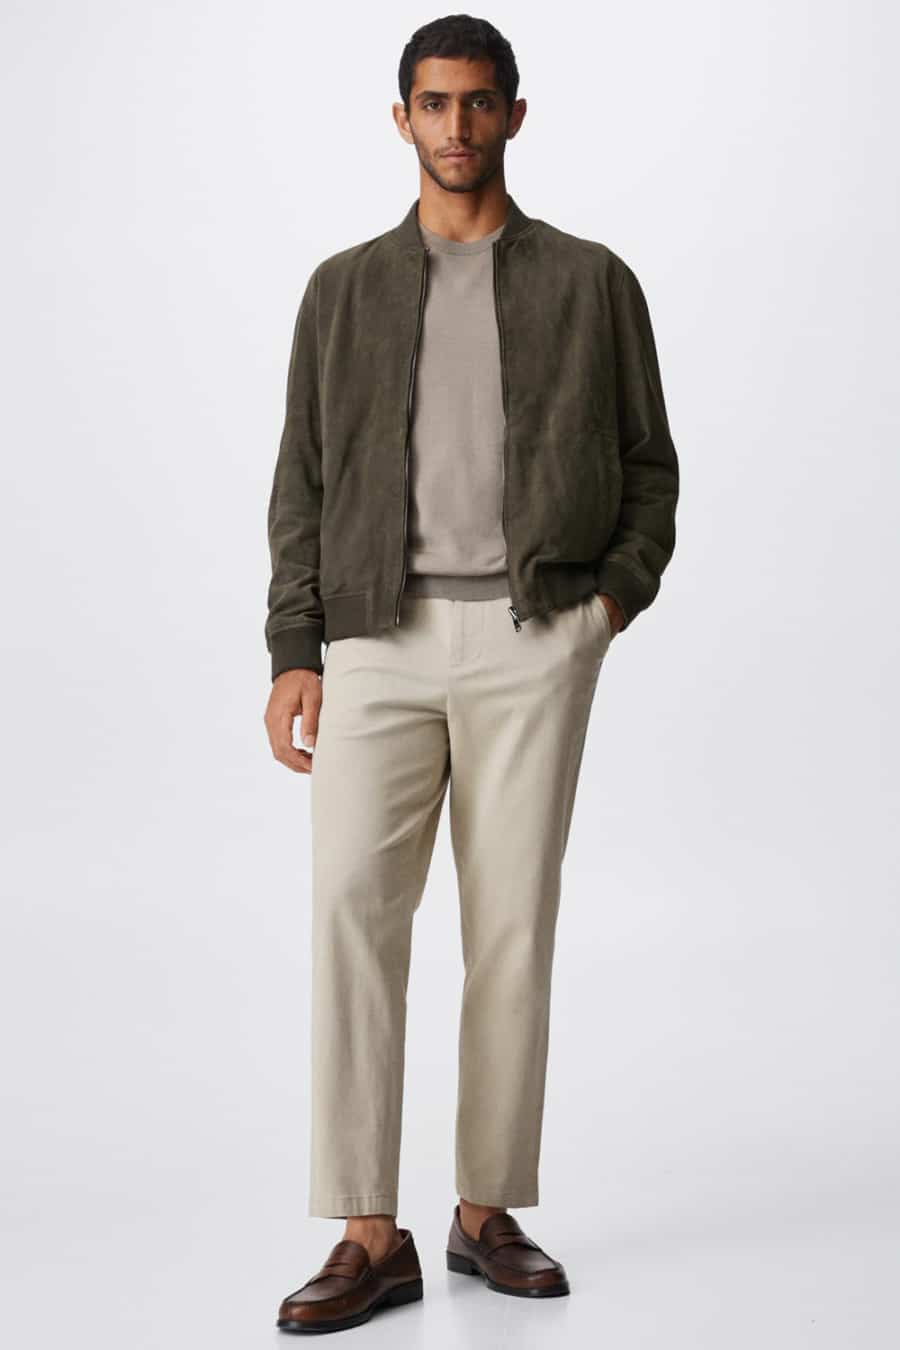 Men's beige trousers, taupe sweater, khaki green suede bomber jacket and brown penny loafers outfit